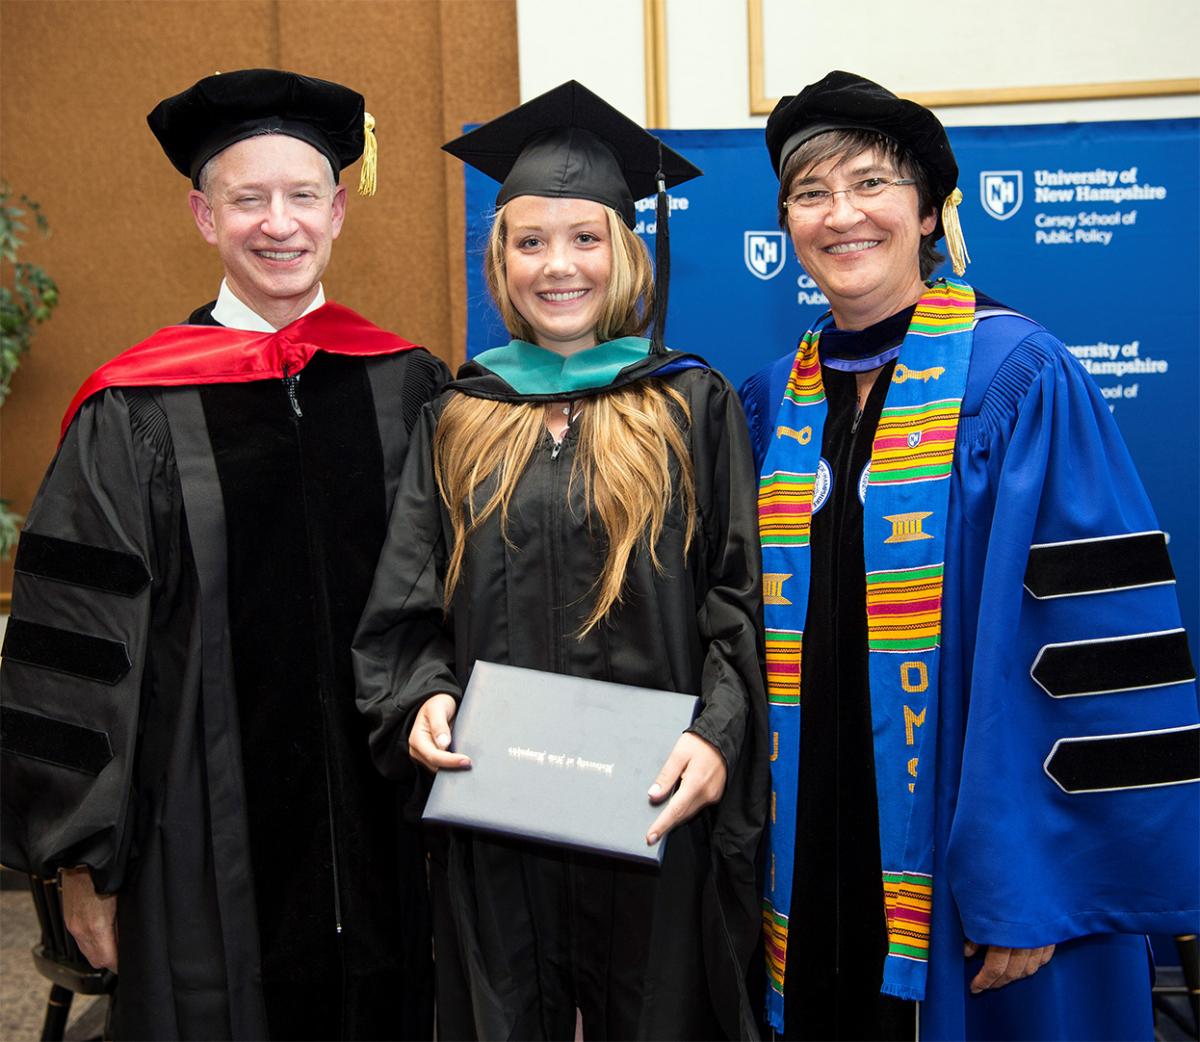 A photo of, from left, Michael Ettlinger, Kennedy Nickerson, and UNH Graduate School Dean Cari Morehead